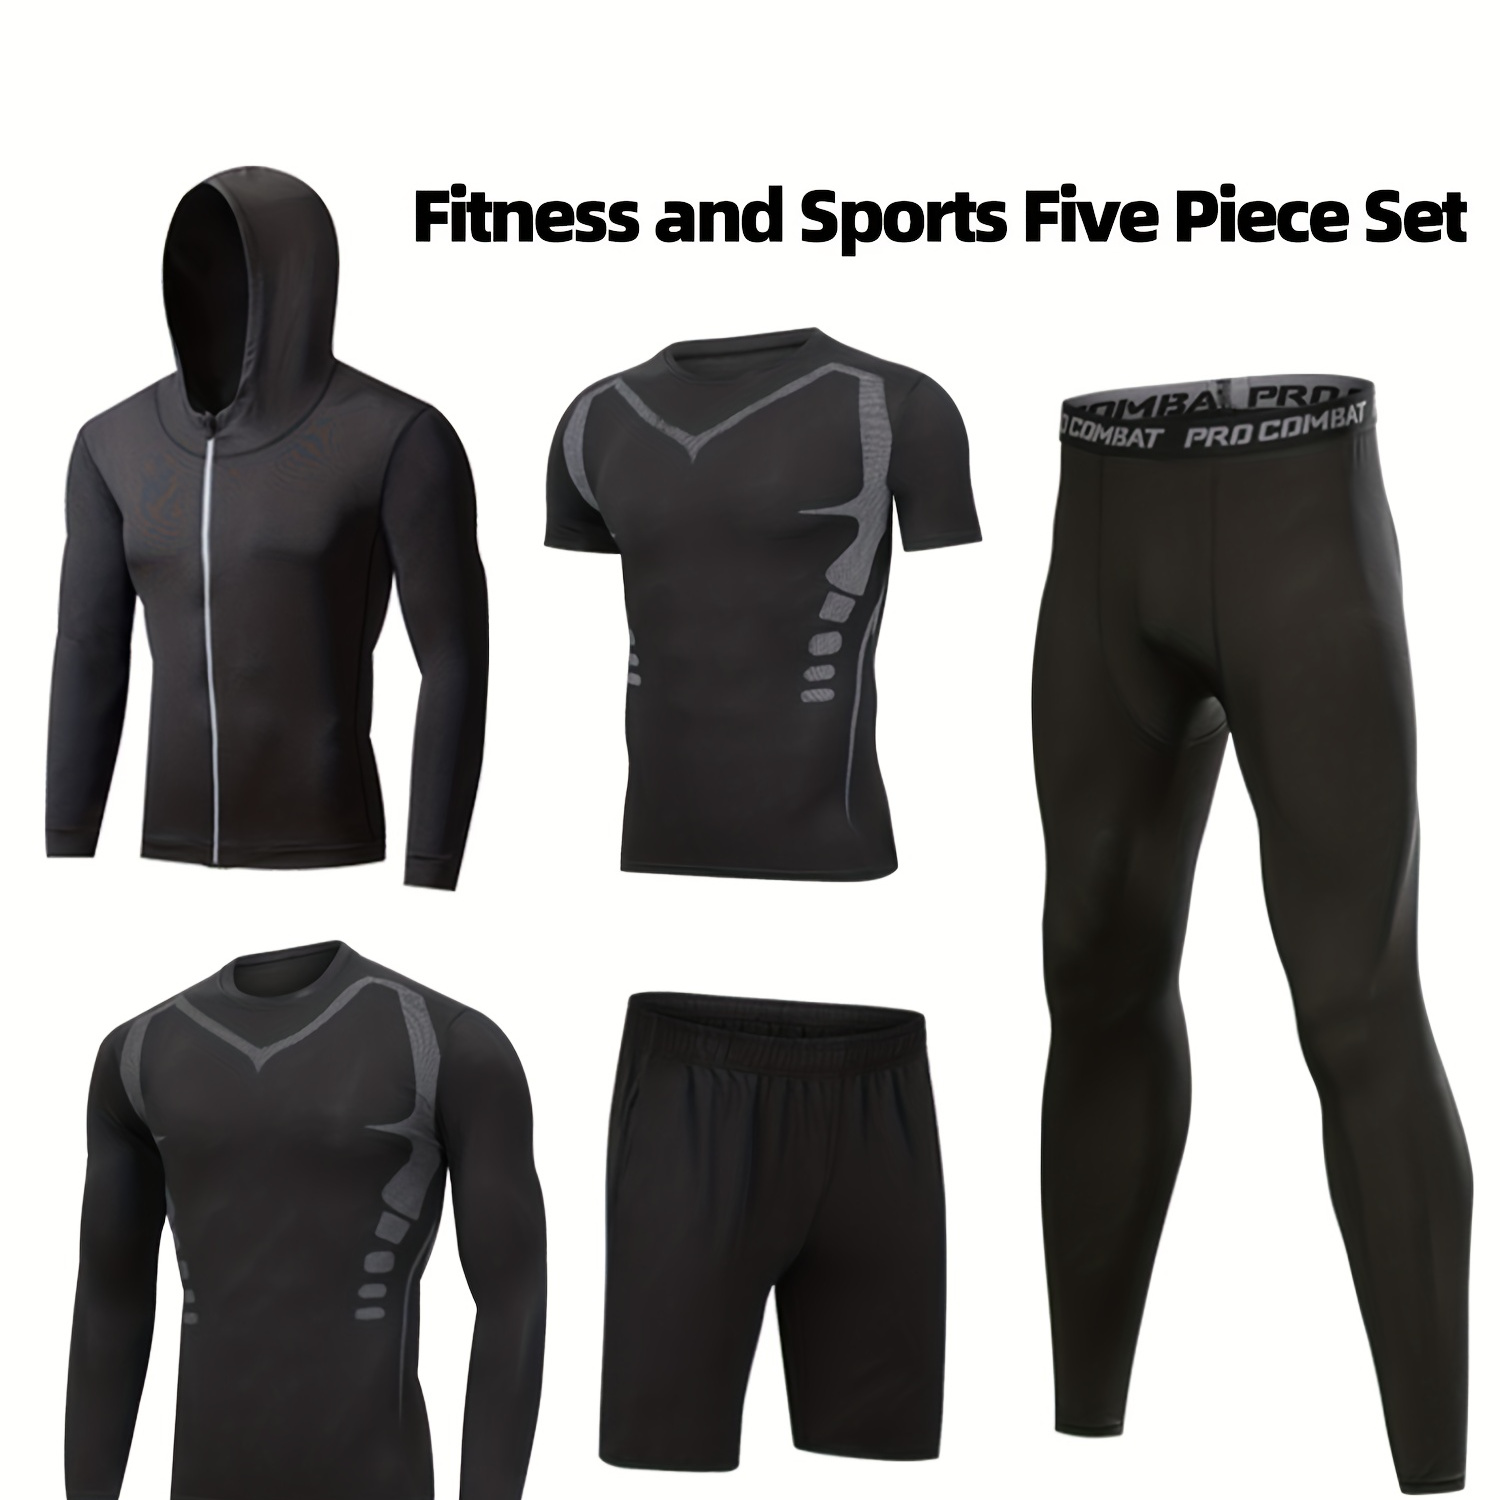 

5-piece Men's Solid Fitness Sportswear Suits, Long Sleeve Hooded Zip-up Sweatshirt + Short Sleeve Compression T-shirt +long Sleeve Compression T-shirt + Breathable Shorts + Mid Stretch Leggings